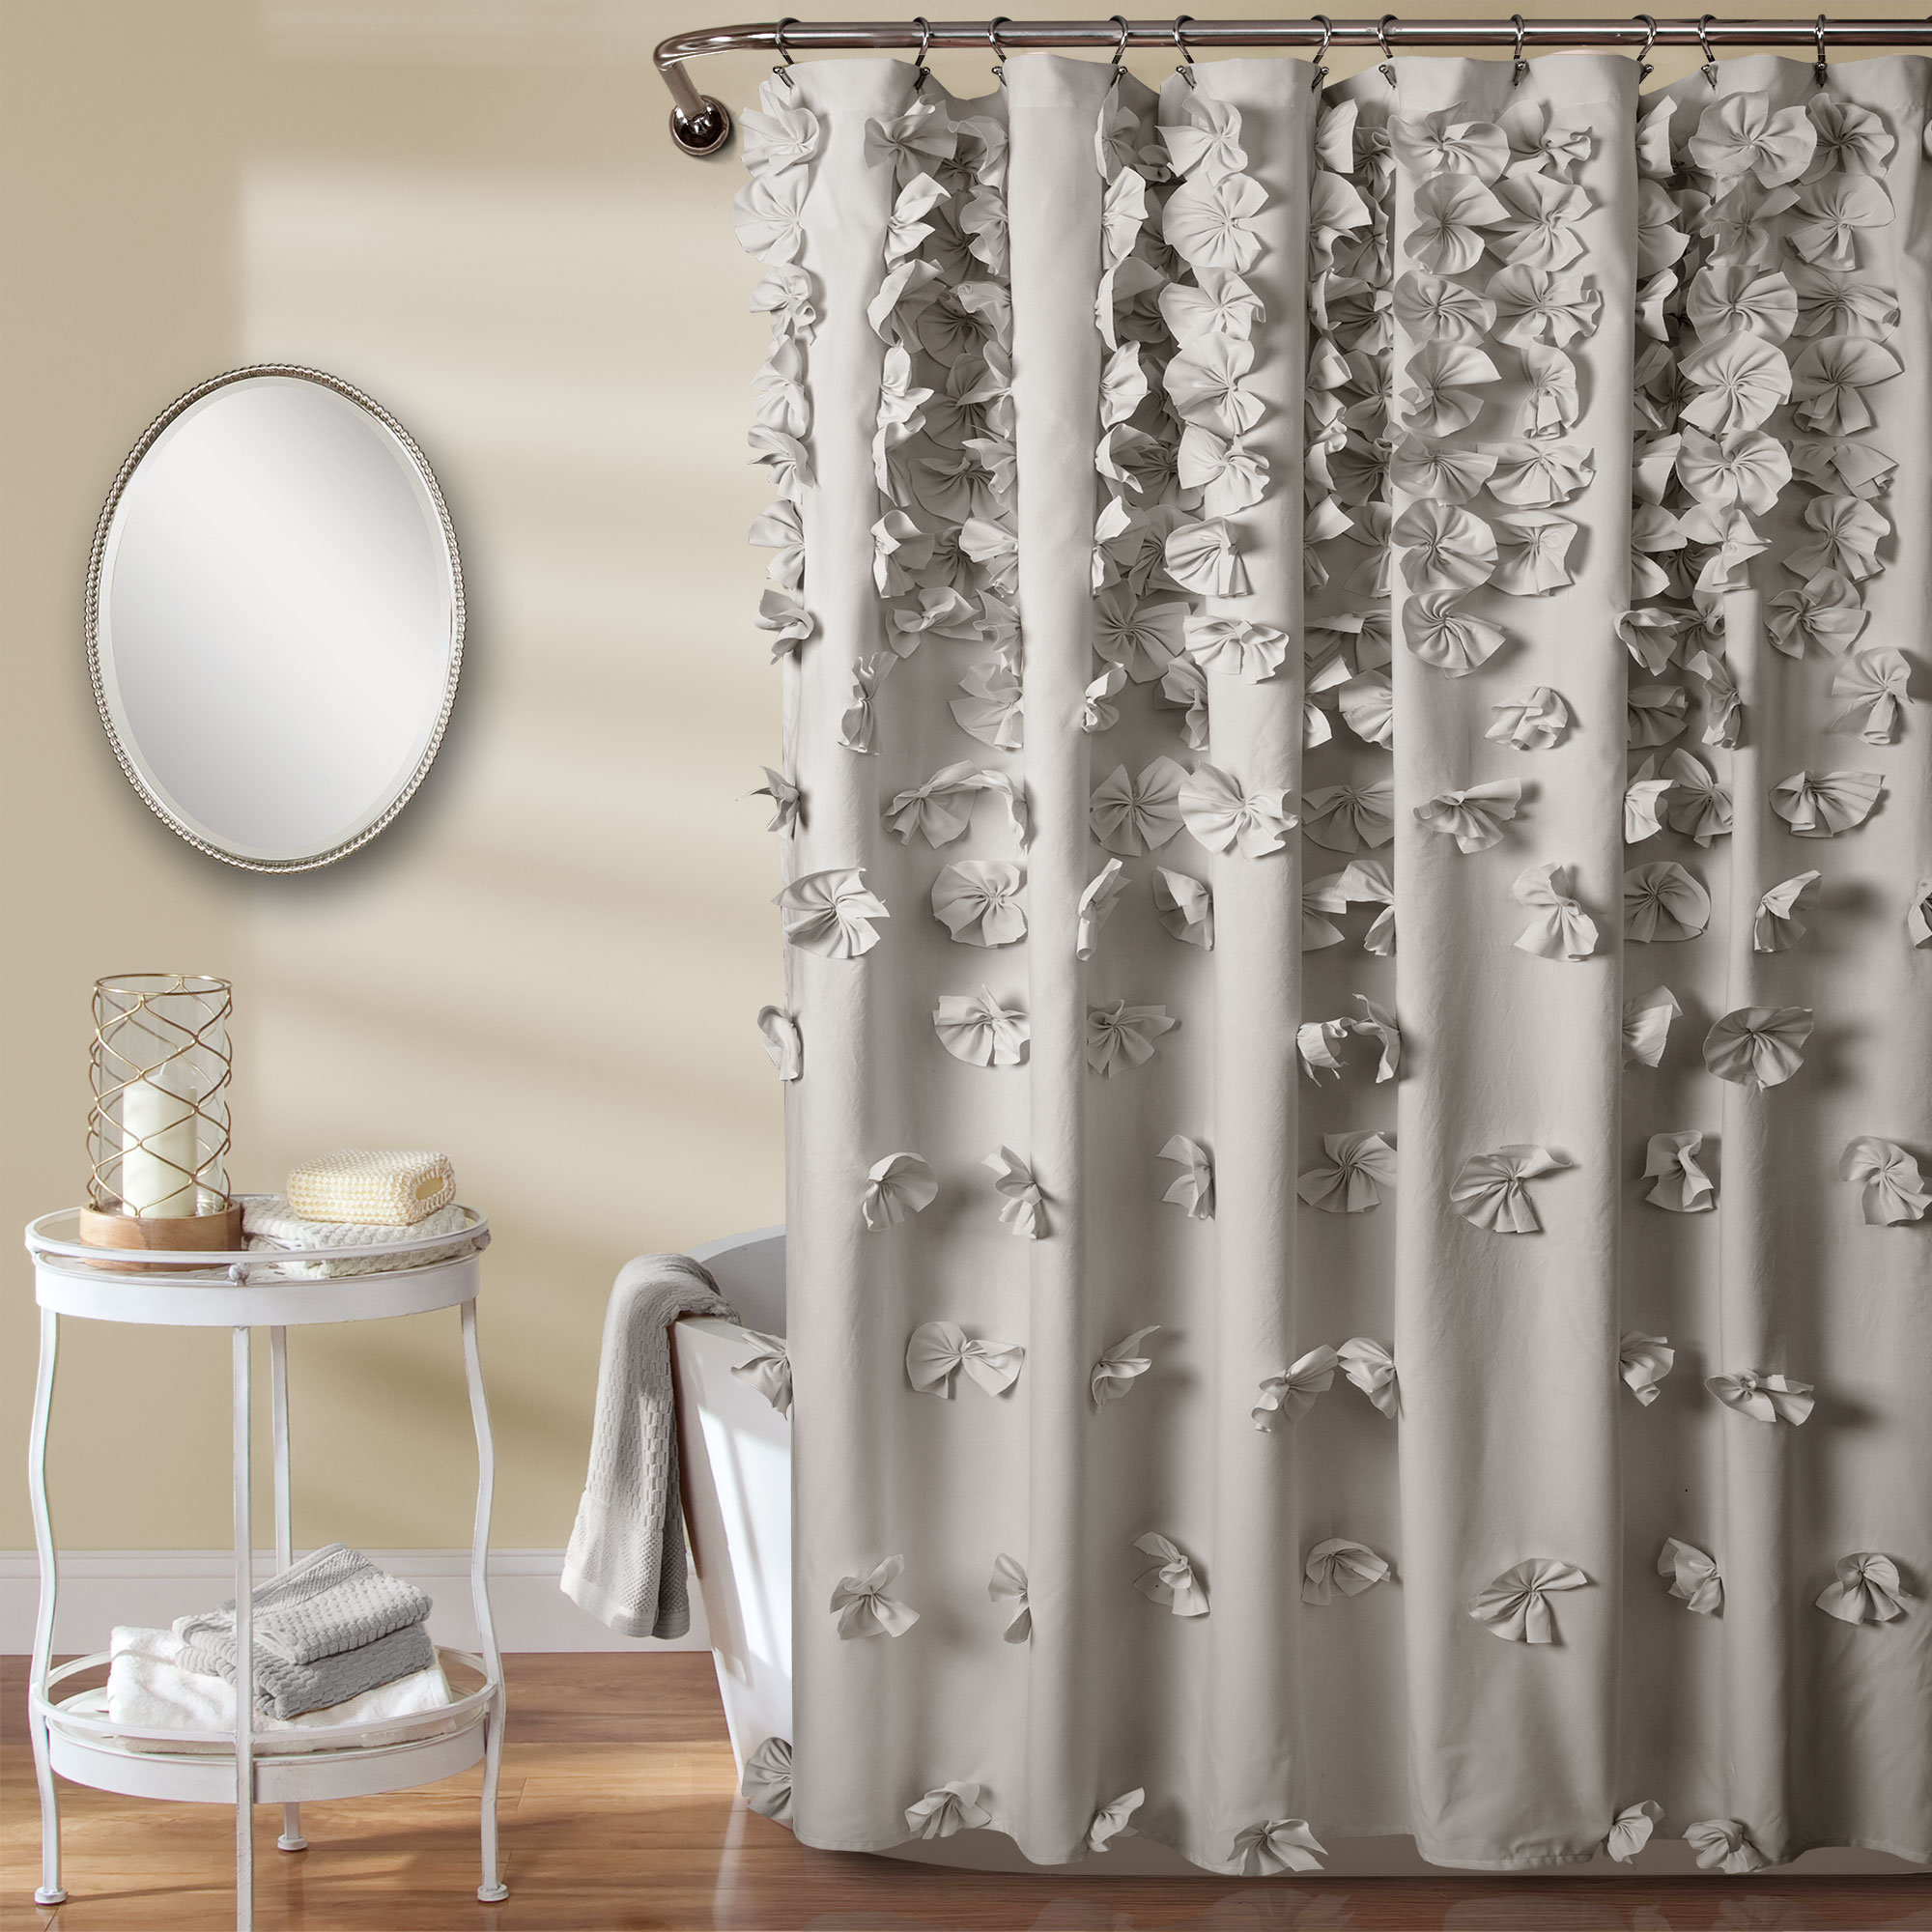 Ophelia & Co. Clarkstown Shower Curtain & Reviews